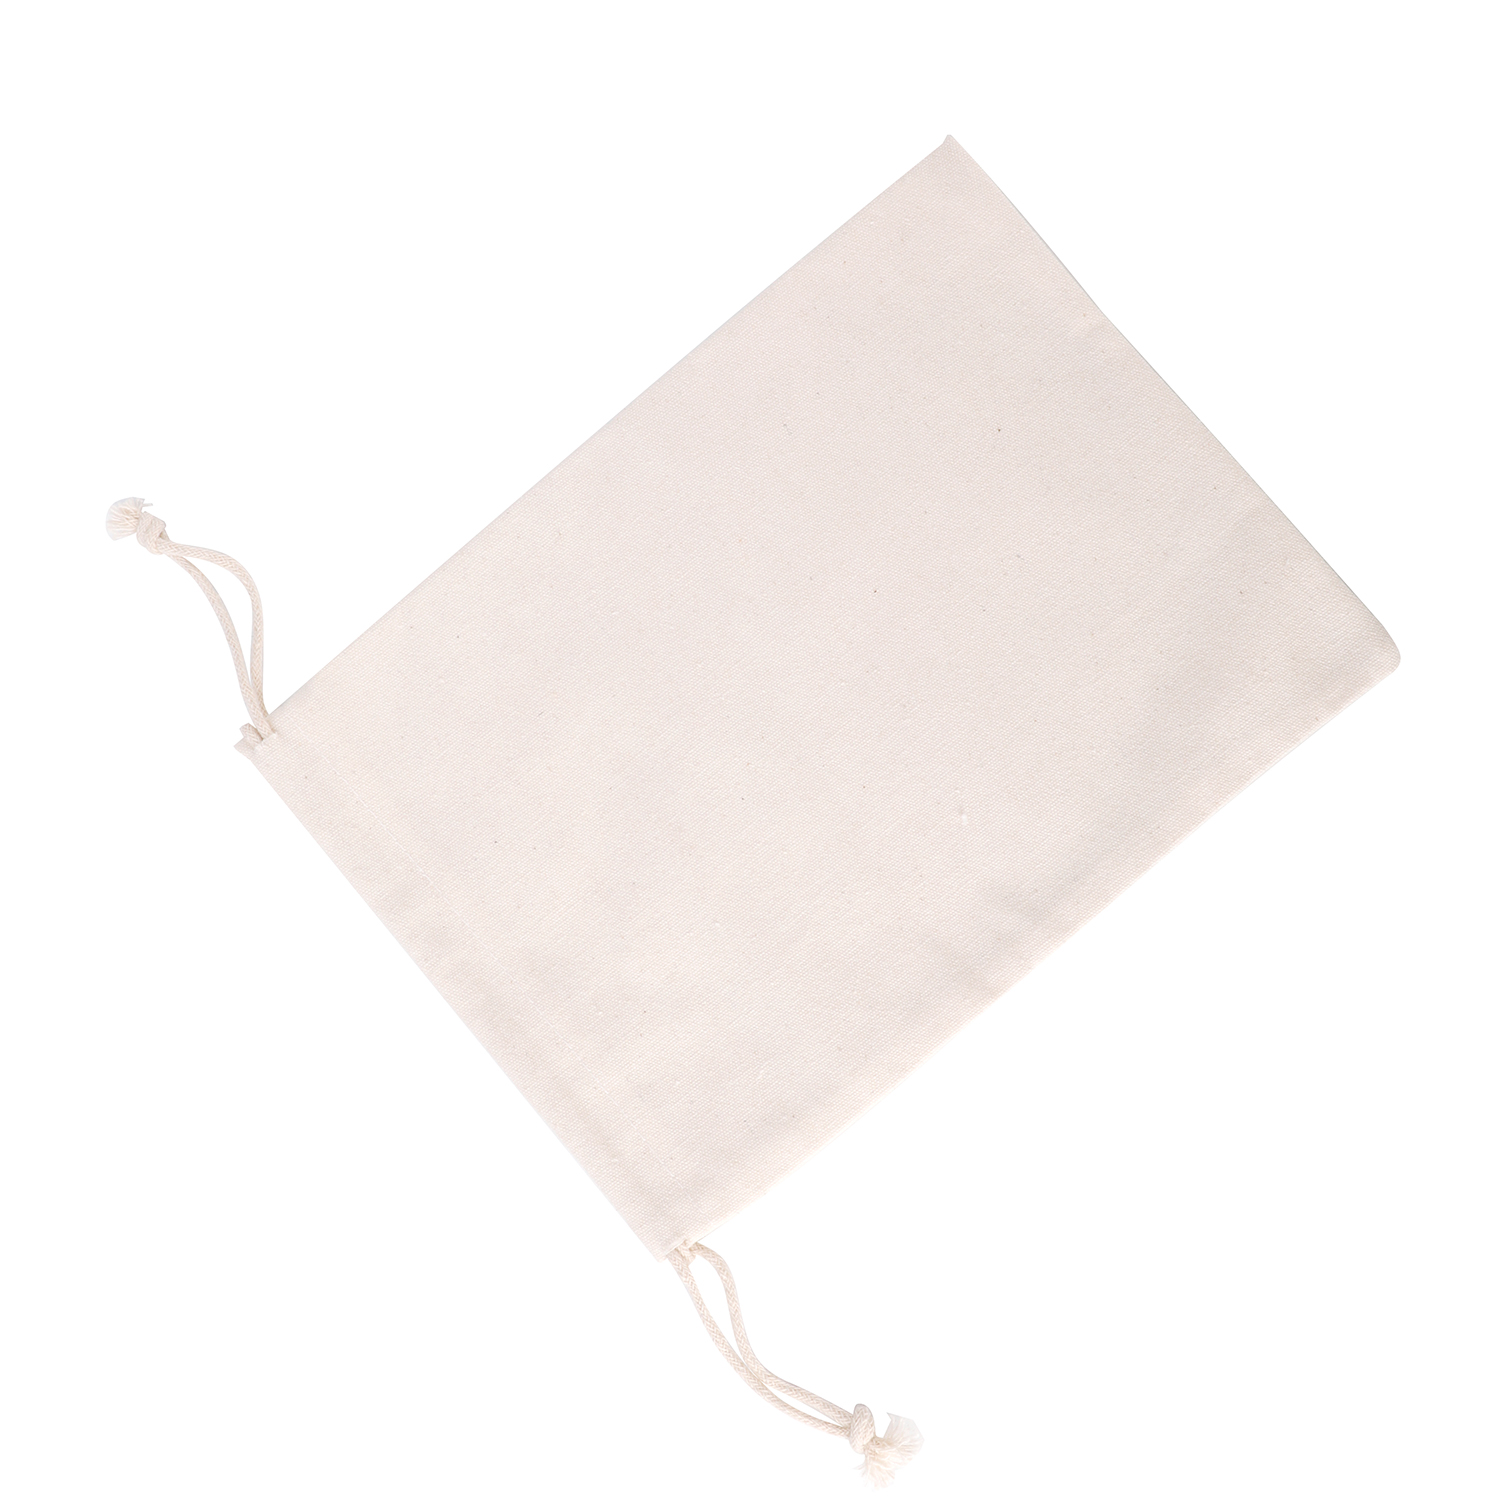 50pcs Calico Drawstring Bag 190x260mm Natural Cotton Pouches - Stanley  Packaging